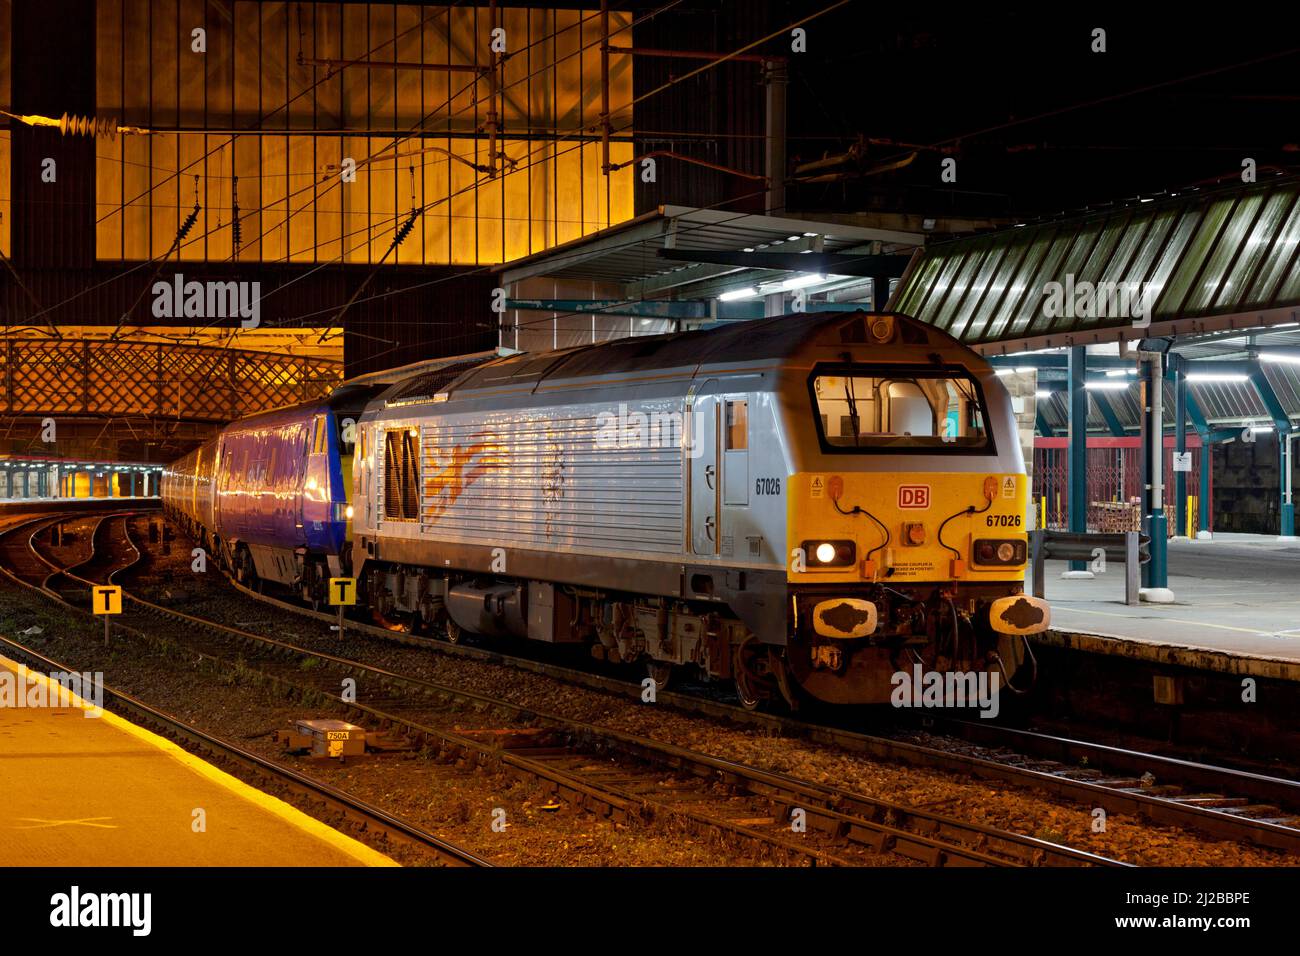 DB Schenker class 67 diesel locomotive 67026 at Carlisle railway station with a diverted East Coast train which it had hauled due to engineering work Stock Photo